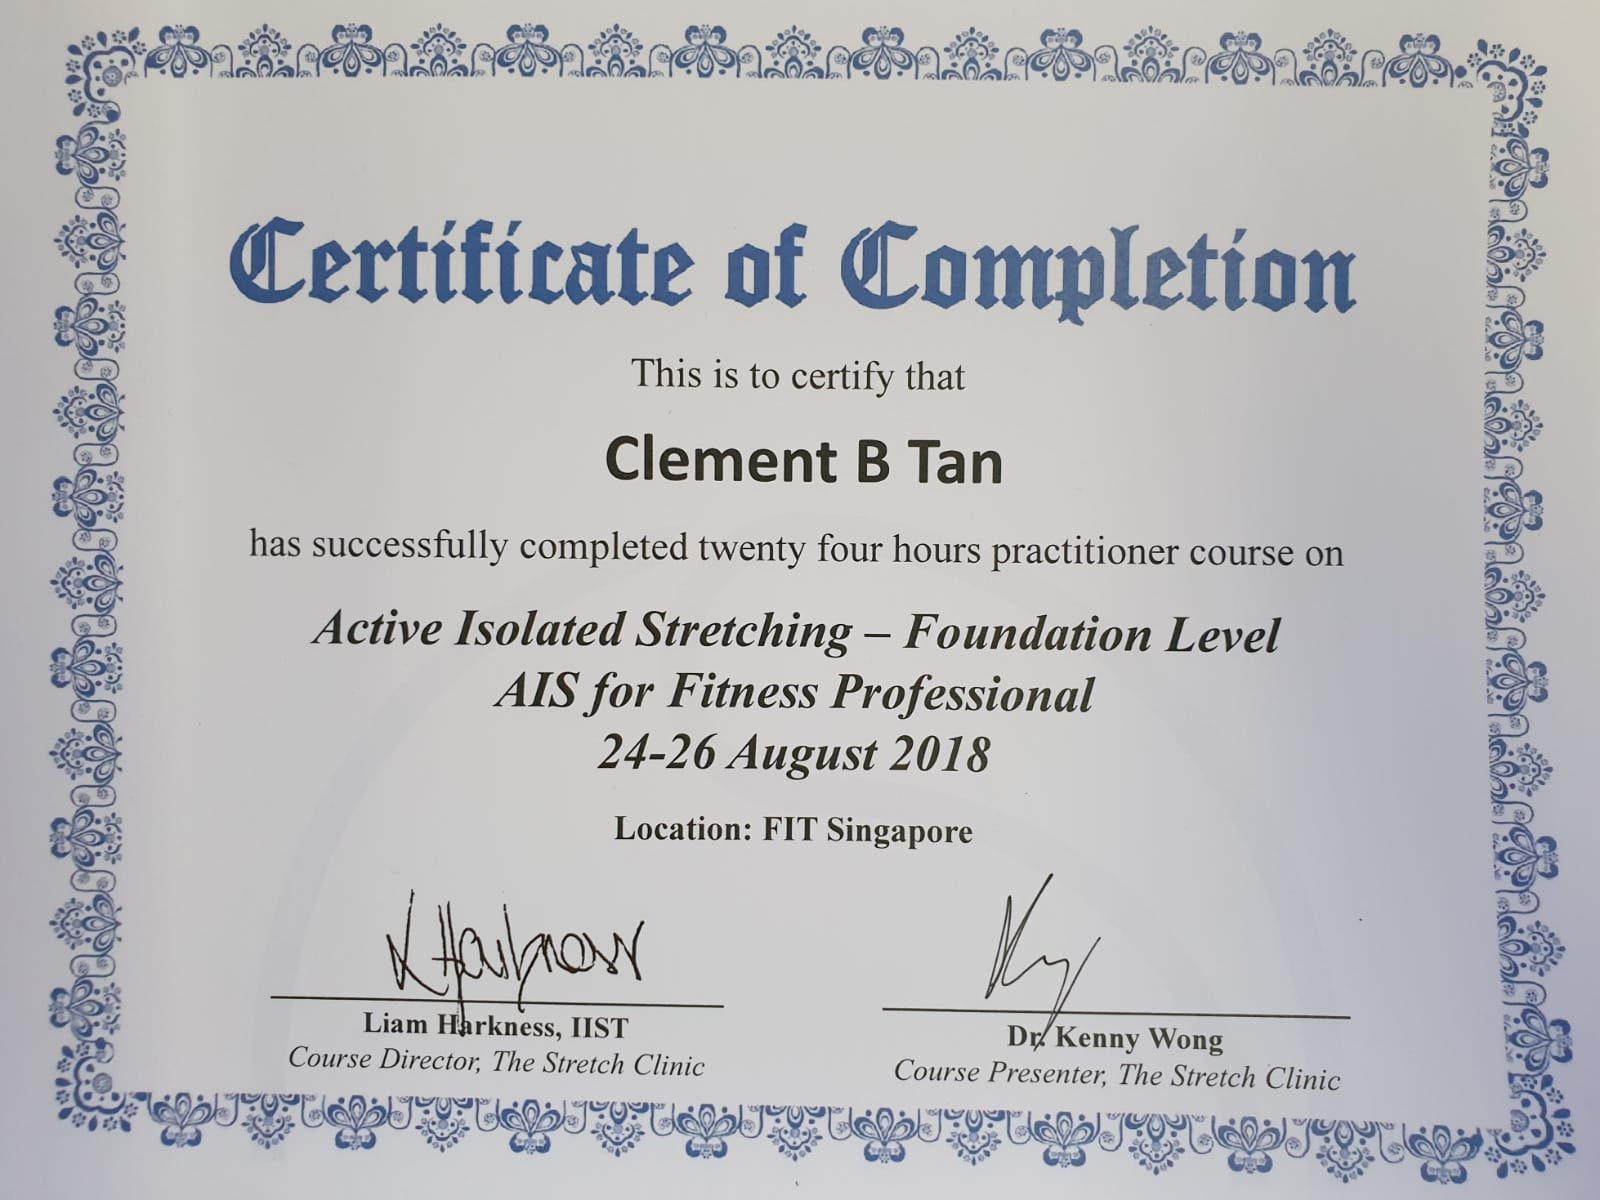 Active Isolated Stretching foundation level certified